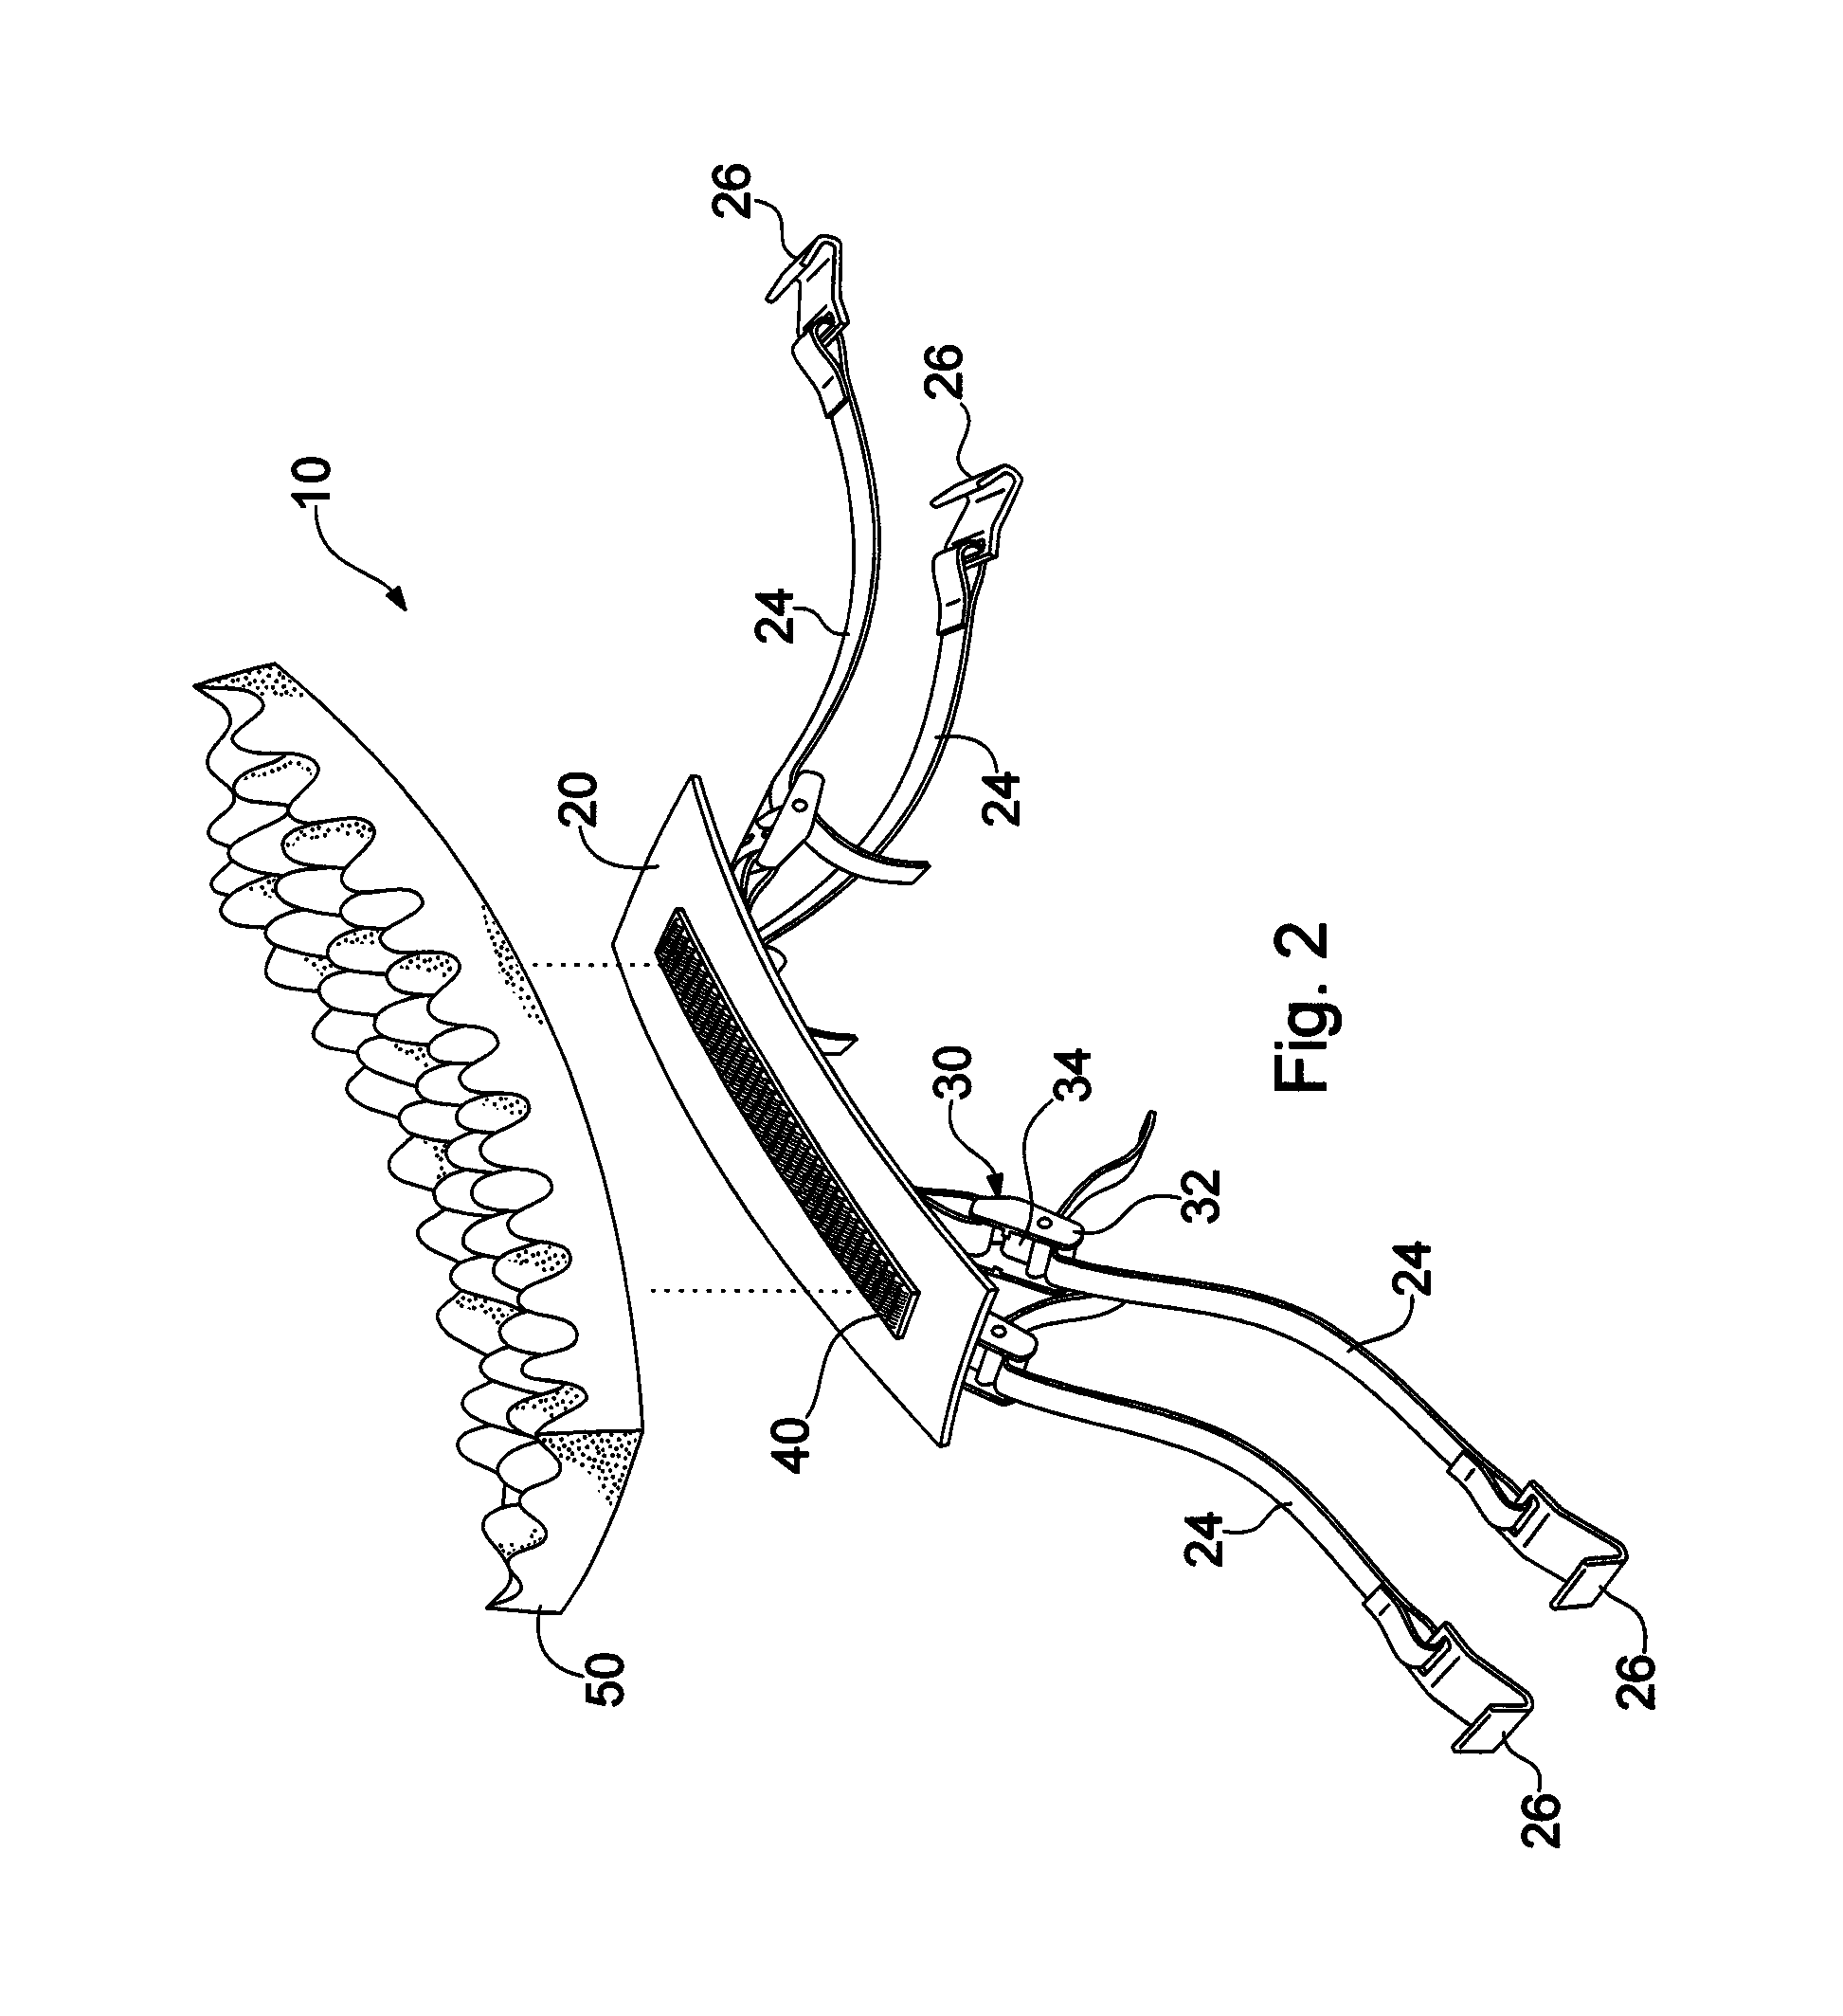 Patient positioning system and method for positioning a patient during a surgical procedure